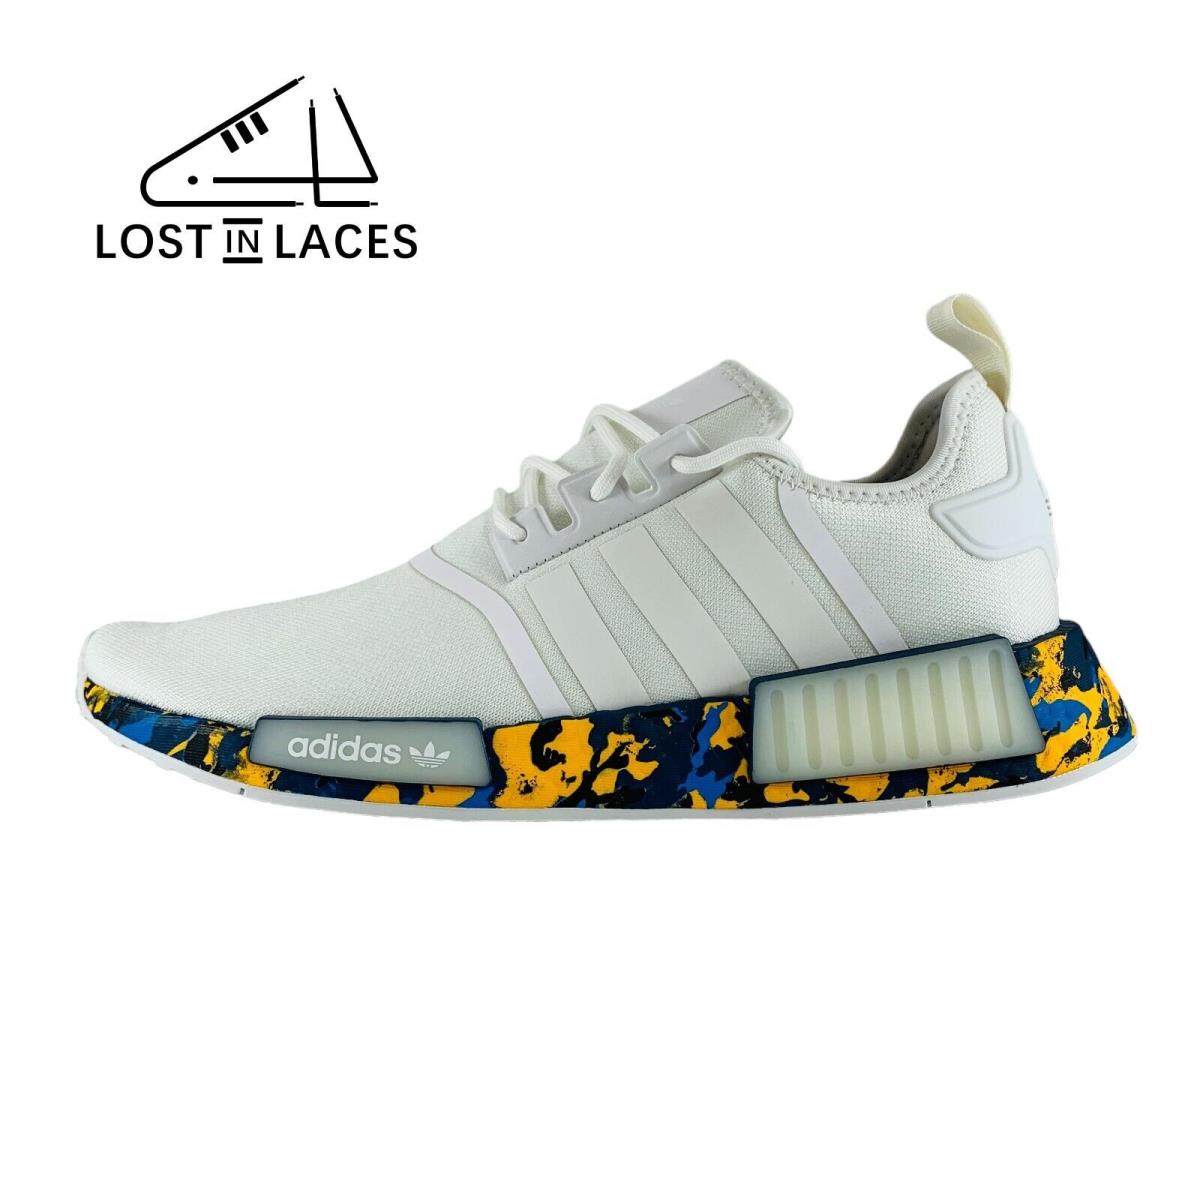 Adidas NMD_R1 White Camo Gold Blue Sneakers Men`s Shoes GX4466